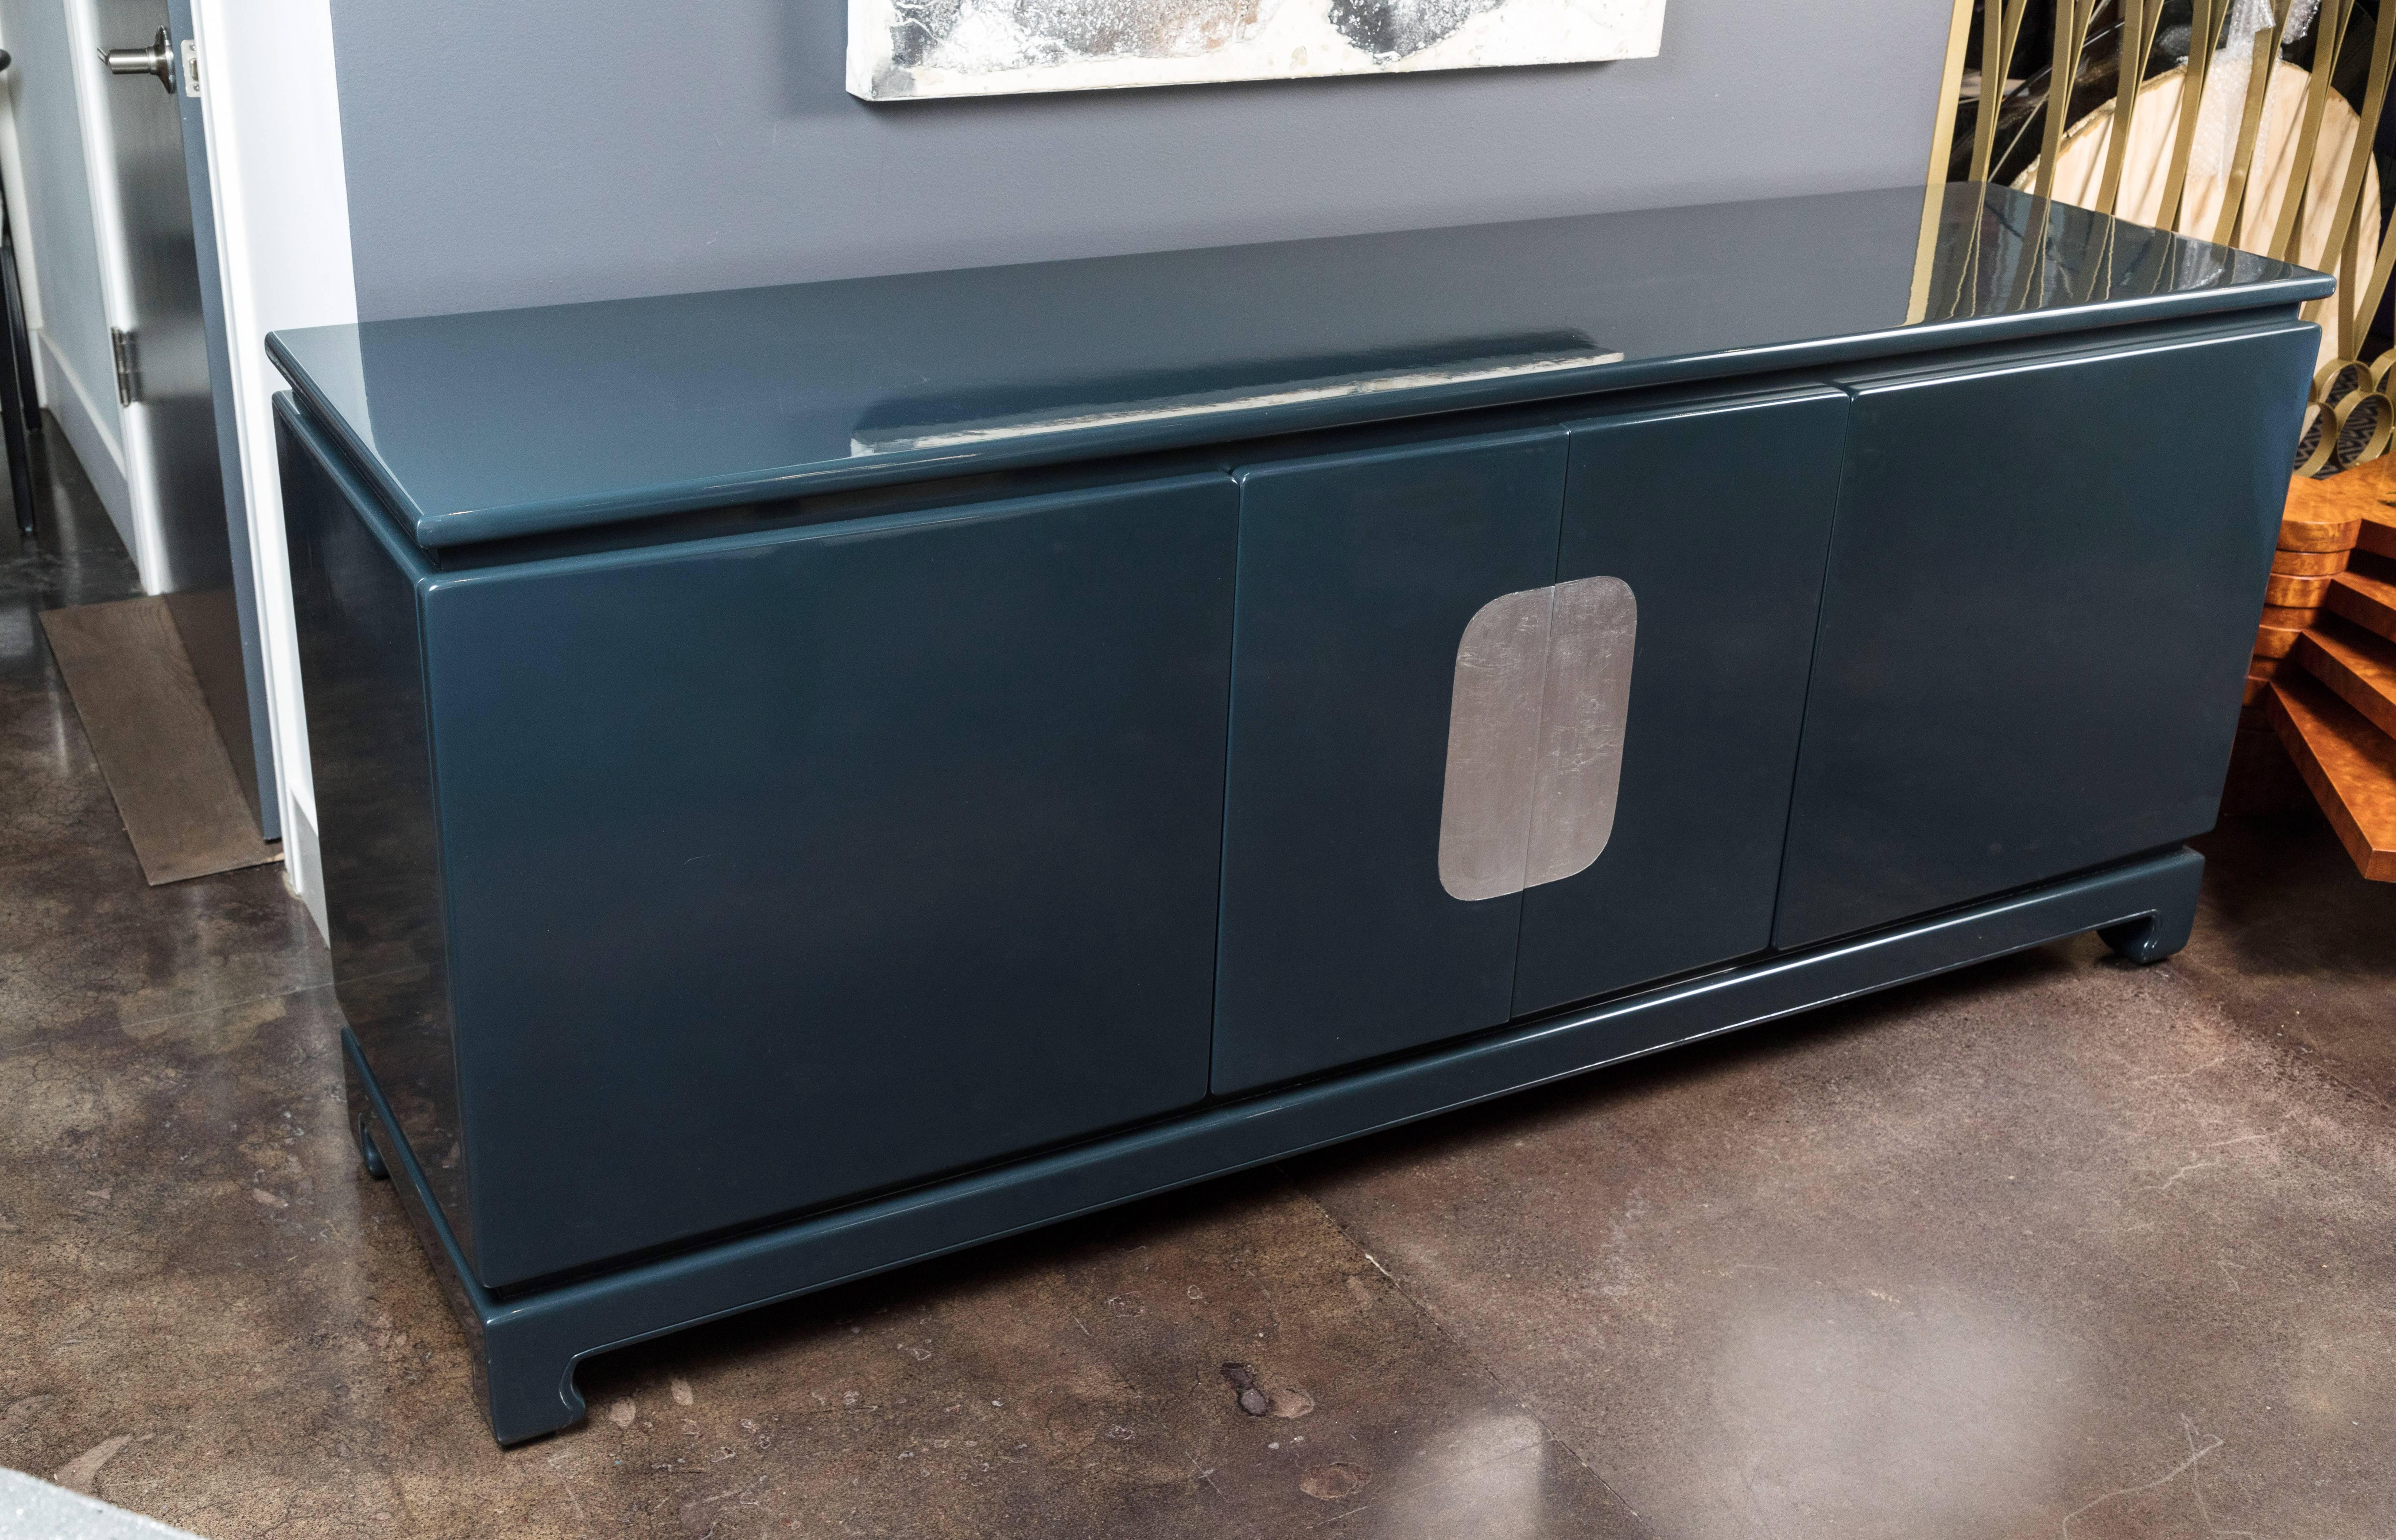 Sleek, modern sideboard with a bit of an Asian influence, early 1980s. The sideboard is substantial in size and has lots of interior storage. It has been newly lacquered in the Farrow & Ball color black blue.